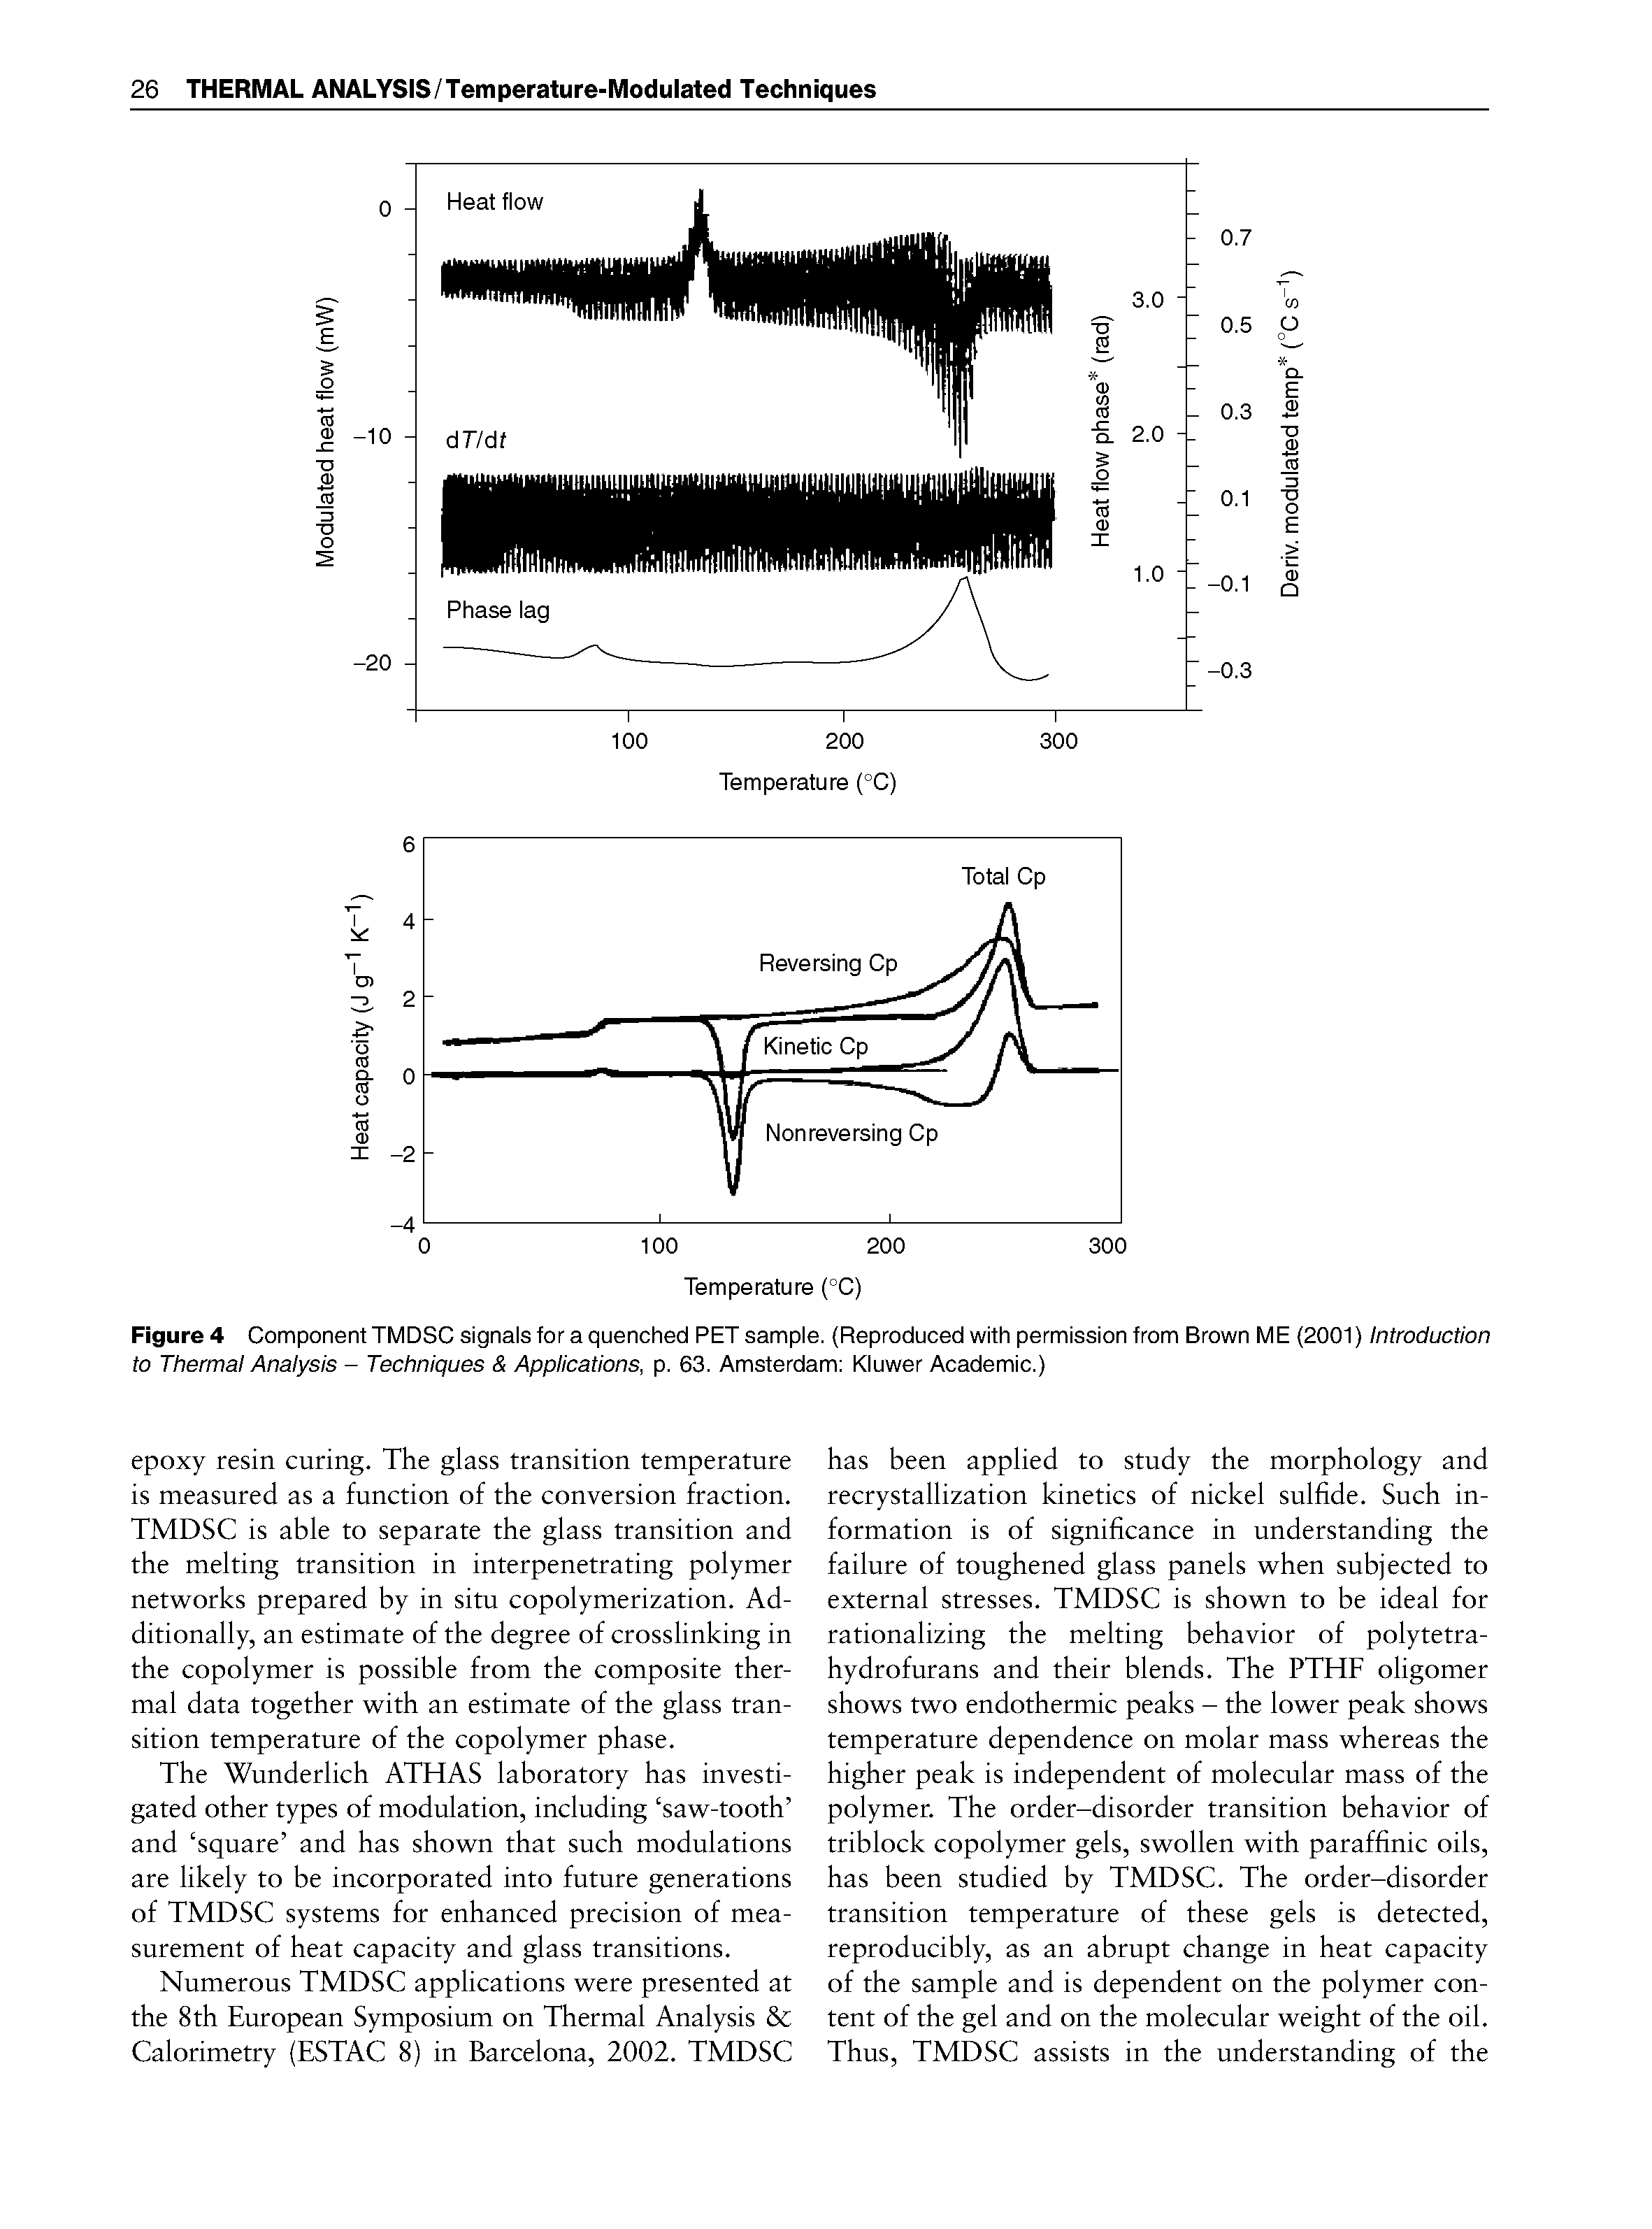 Figure 4 Component TMDSC signals for a quenched PET sample. (Reproduced with permission from Brown ME (2001) Introduction to Thermal Analysis - Techniques Applications, p. 63. Amsterdam Kluwer Academic.)...